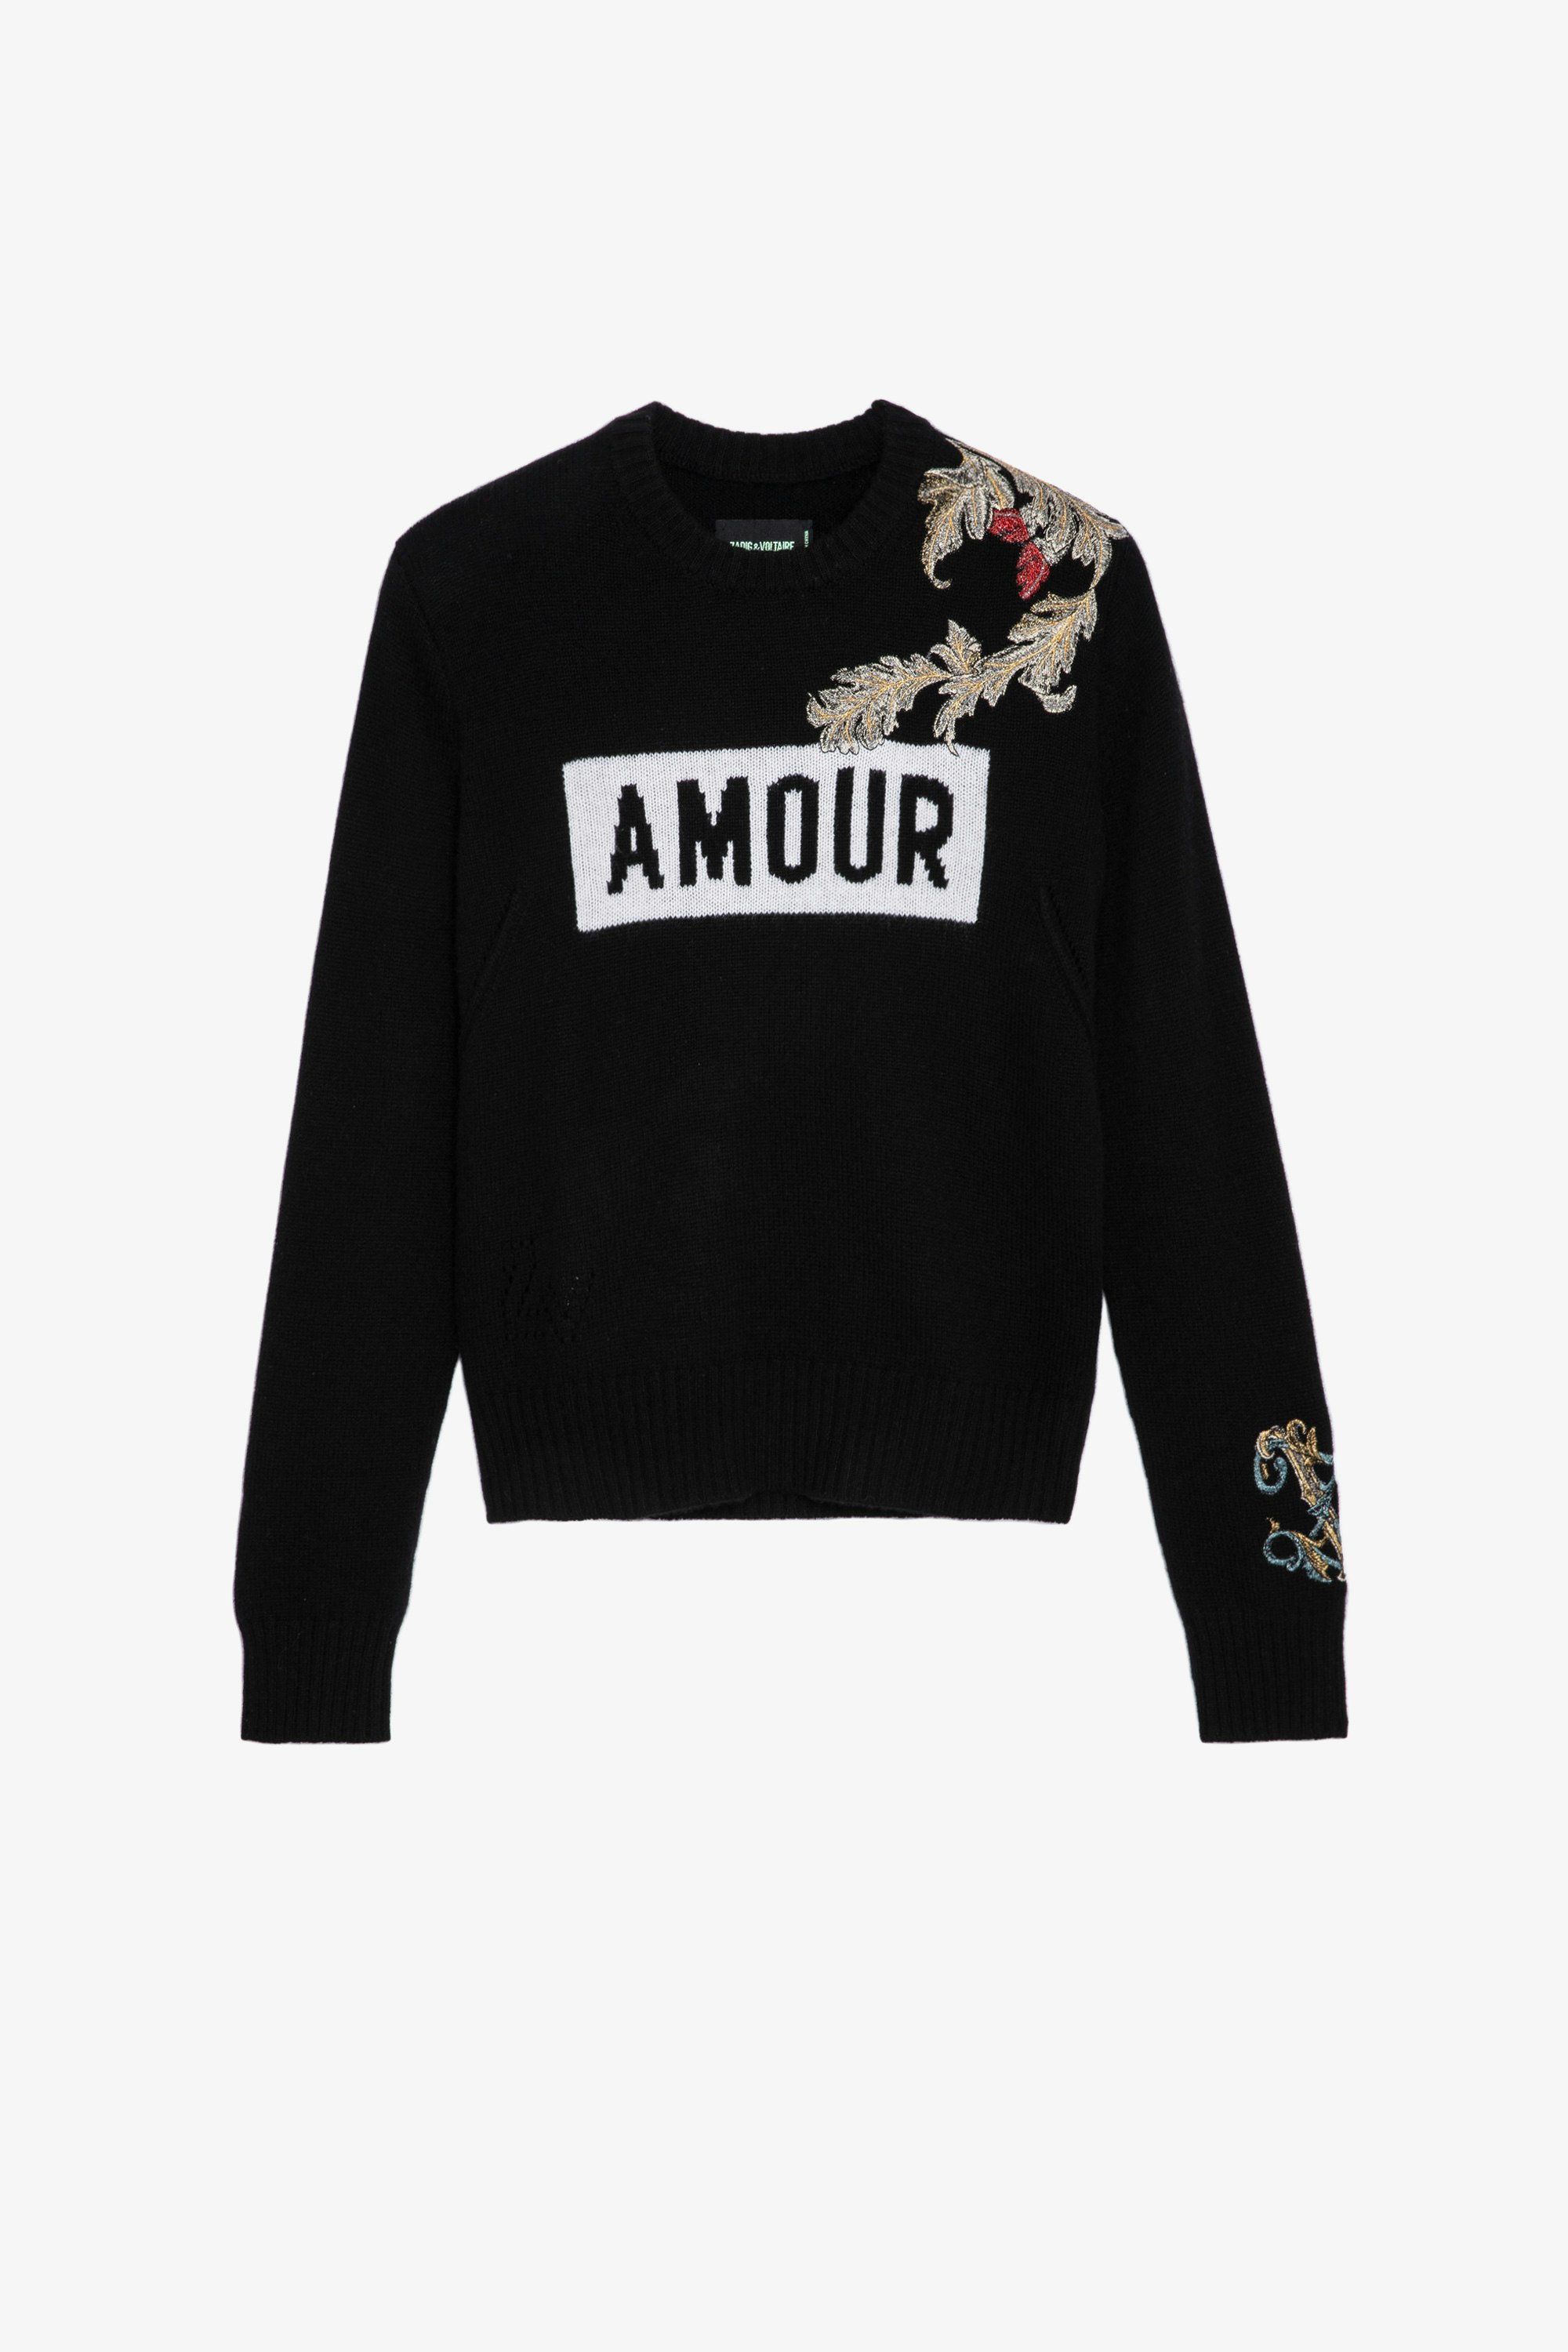 Life Cashmere Jumper Women’s black cashmere jumper with “Amour” slogan and floral motifs